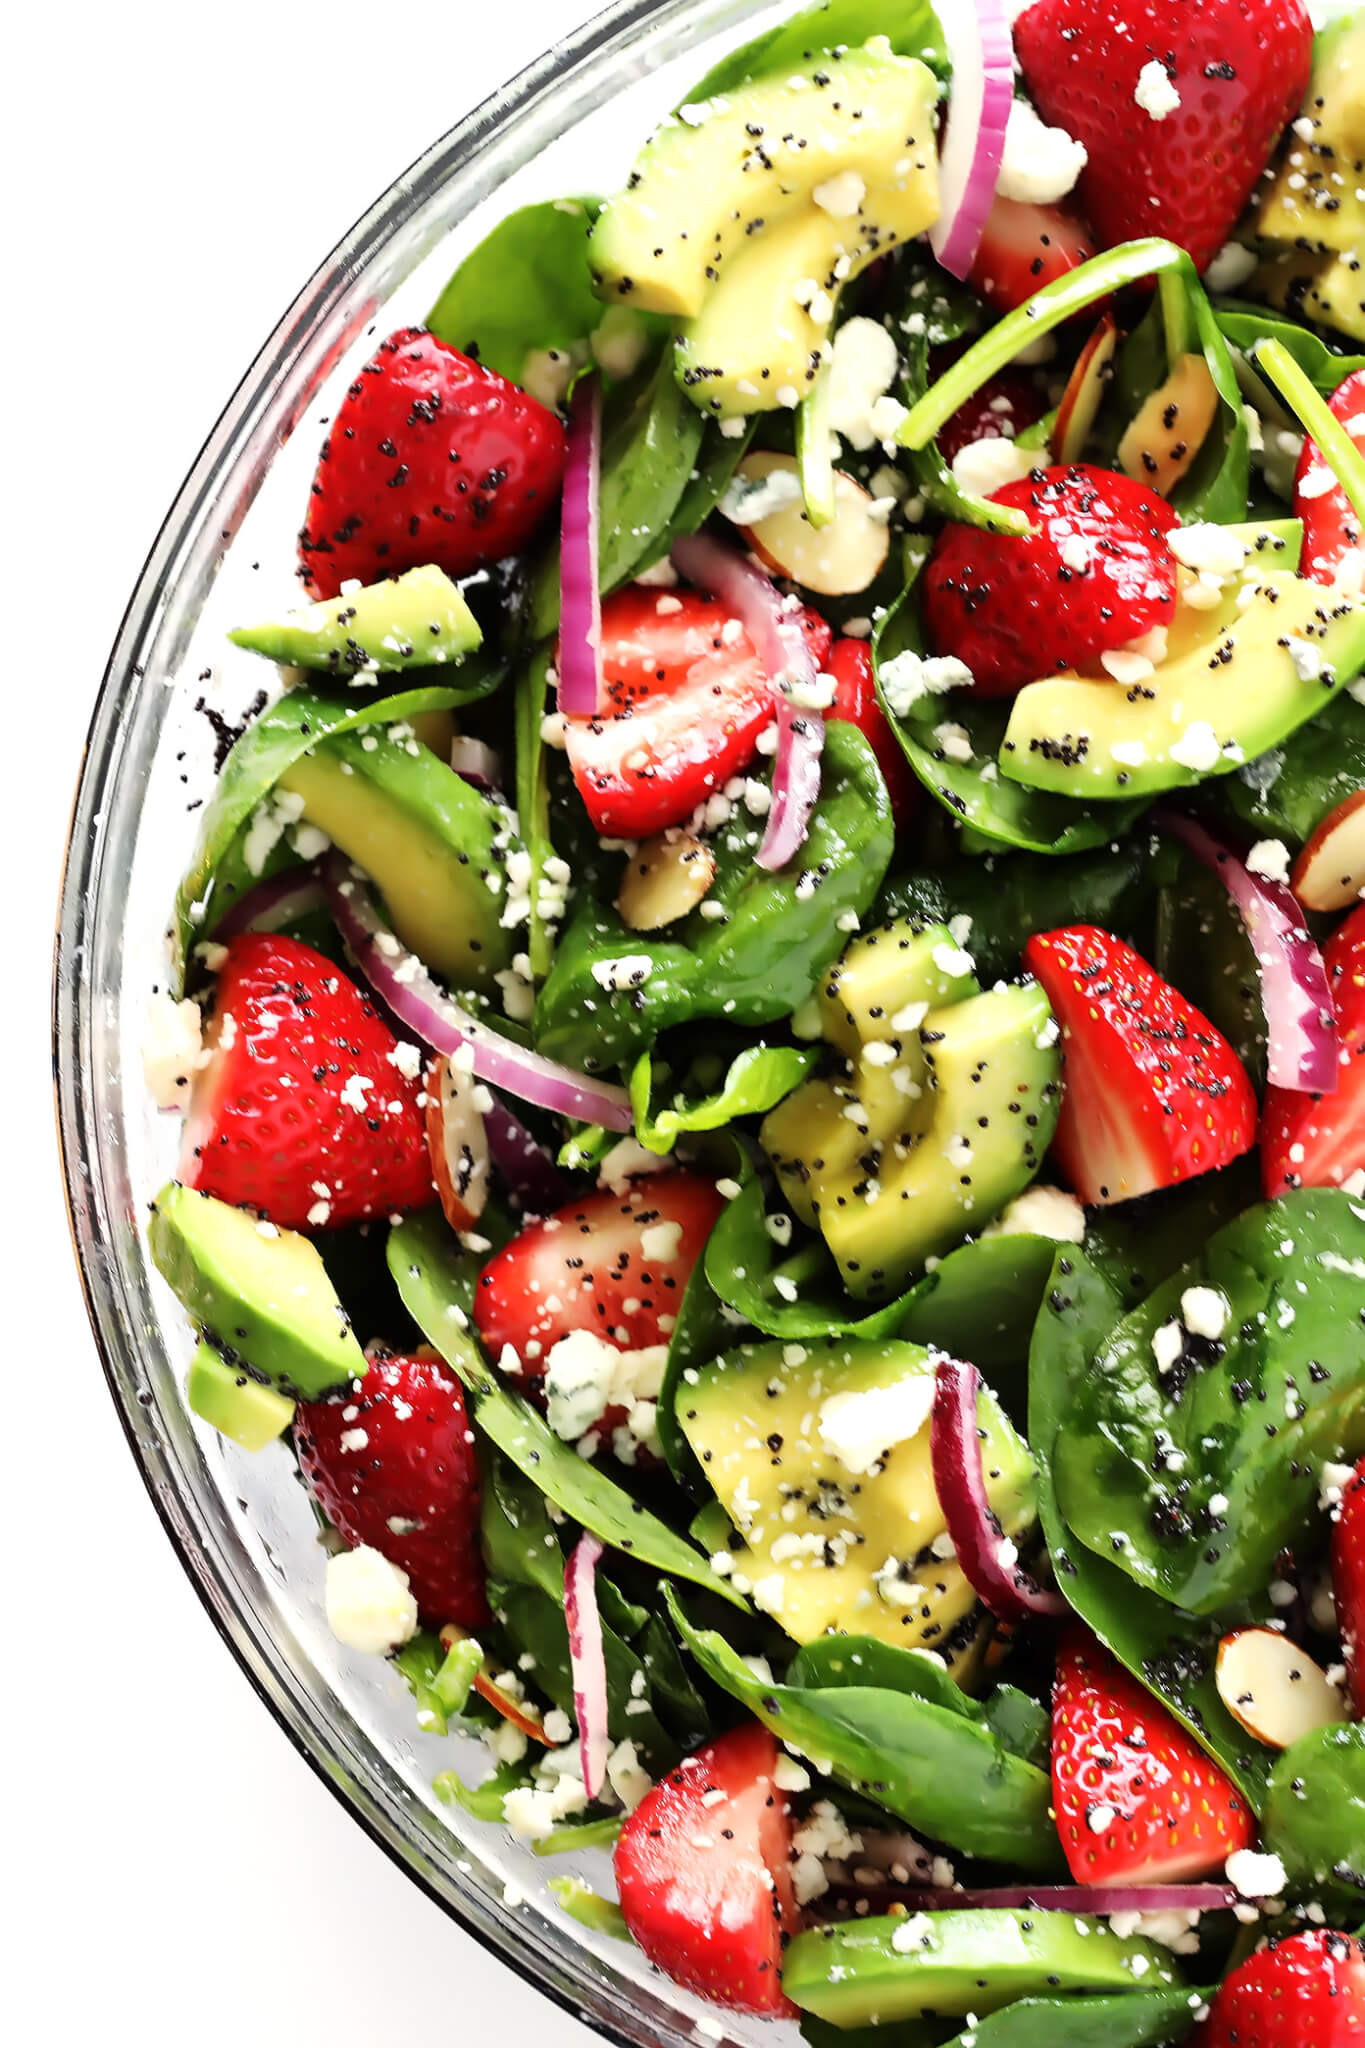 Spinach Salad Dressings Recipes
 Avocado Strawberry Spinach Salad with Poppyseed